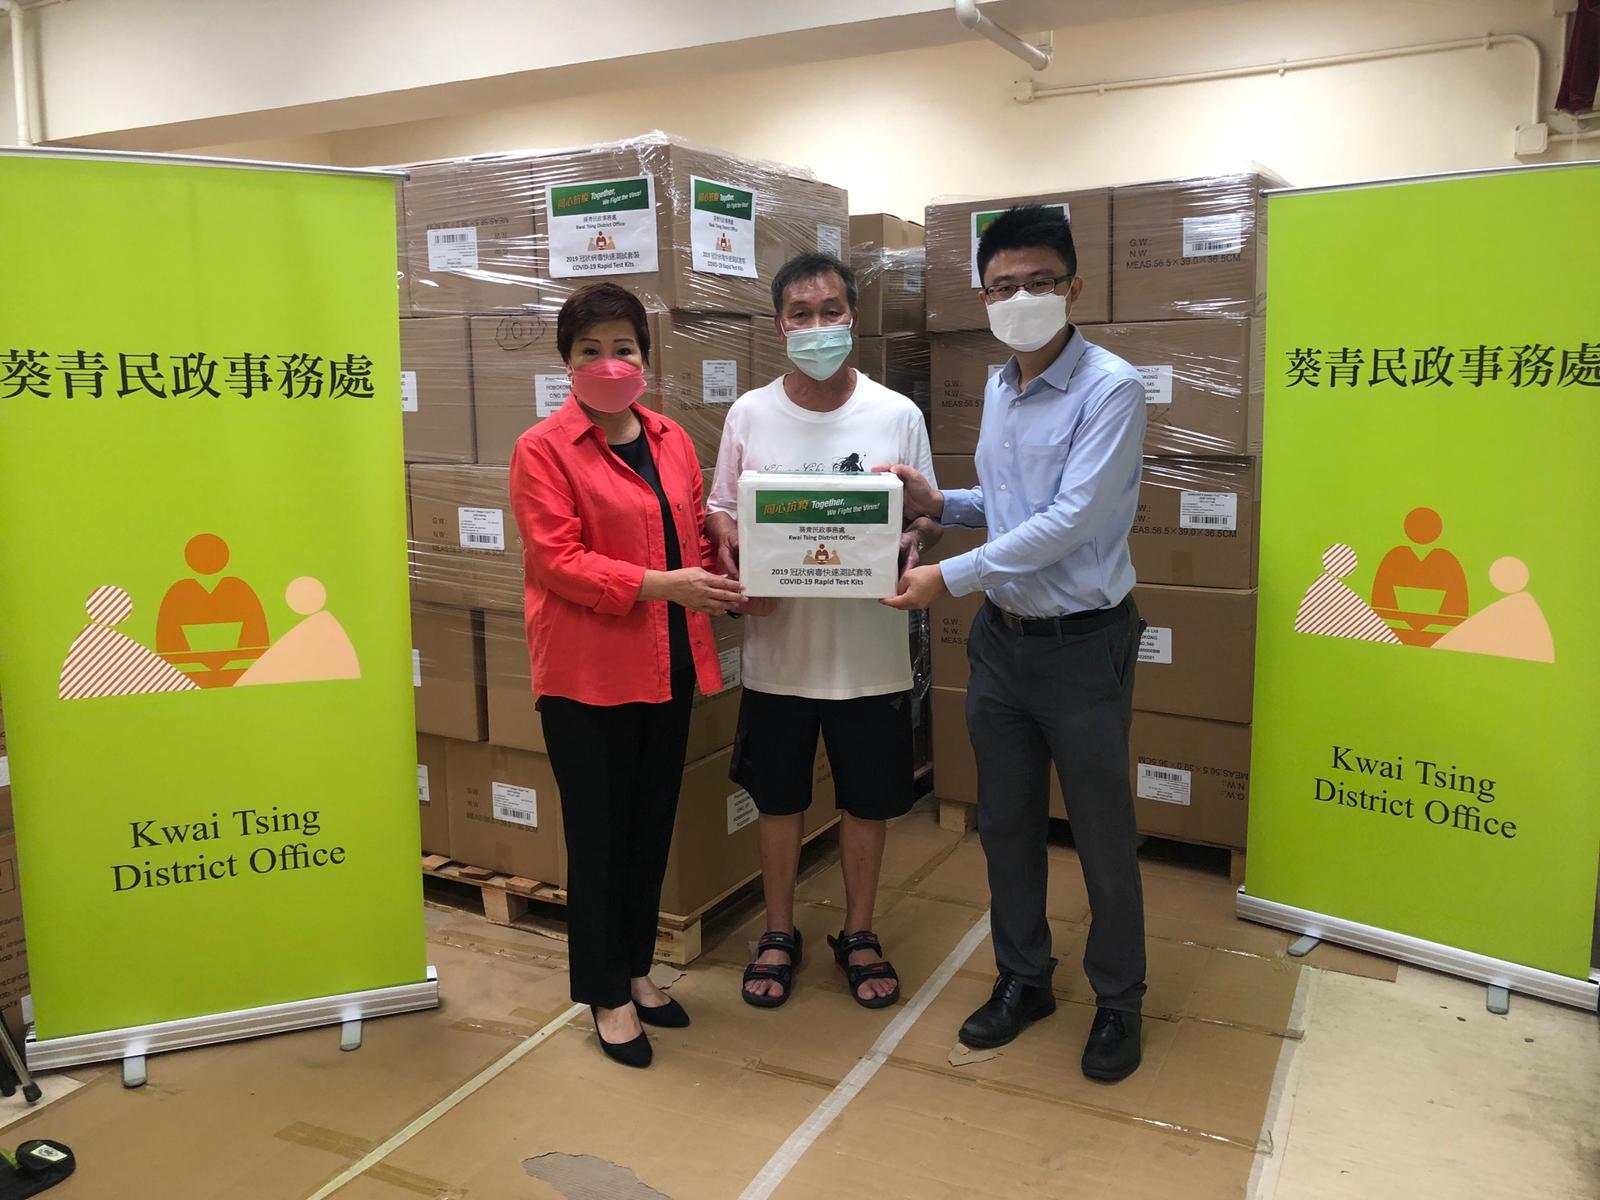 The Kwai Tsing District Office today (July 5) distributed rapid test kits to households, cleansing workers and property management staff living and working in Cheung Fat Estate for voluntary testing through the property management company.

